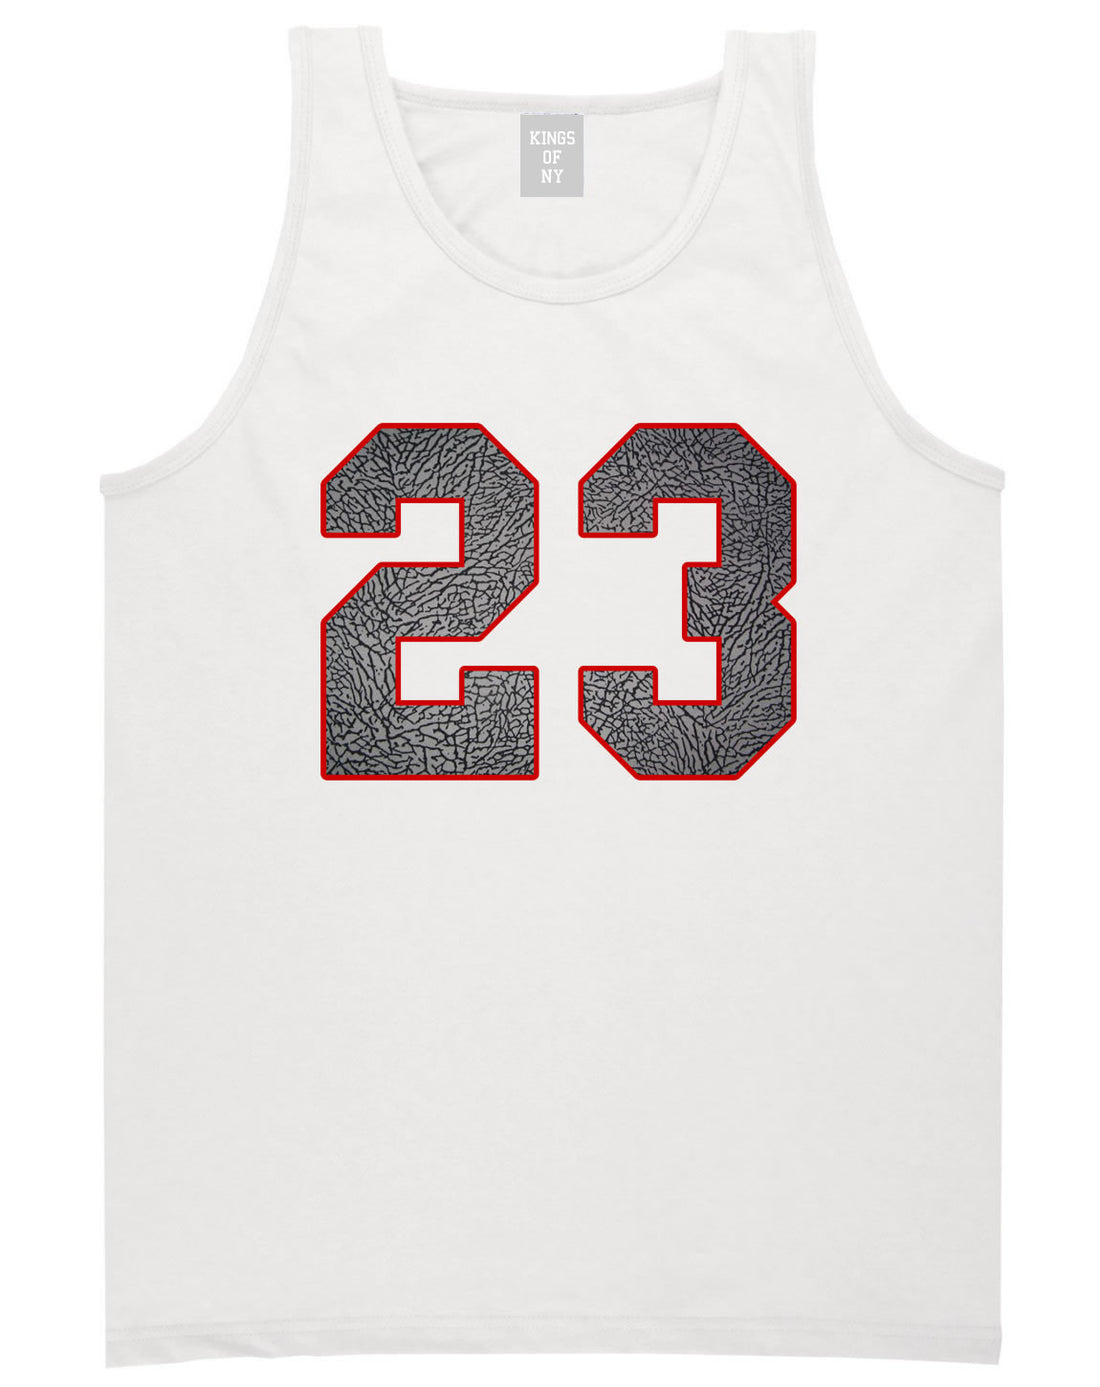 23 Cement Red Jersey Tank Top in White By Kings Of NY